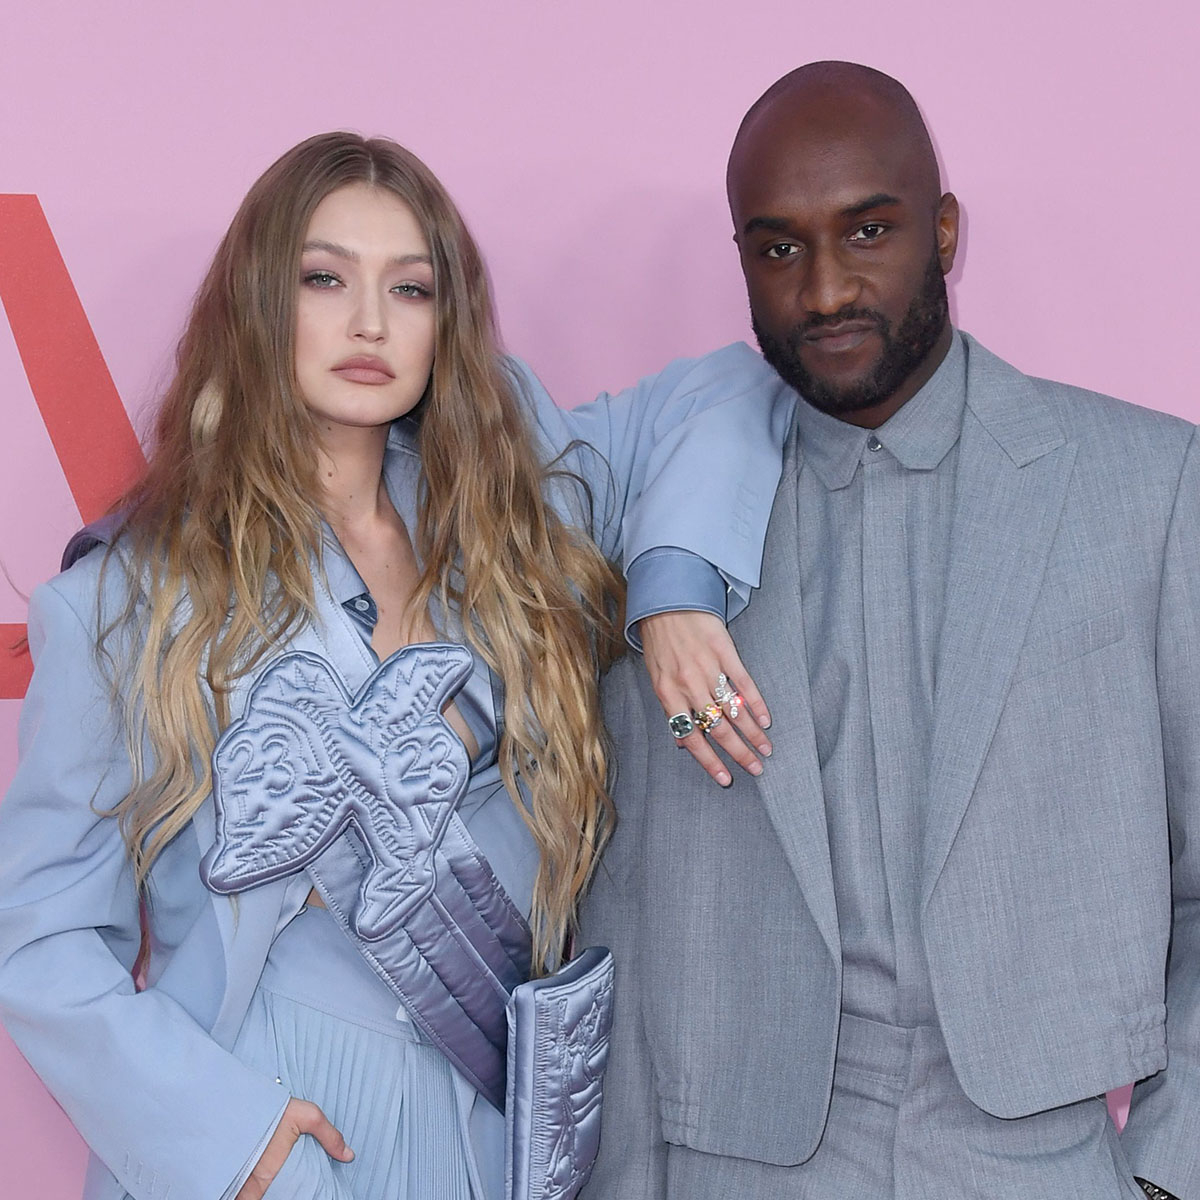 Gigi Hadid wearing dress by Off-White and Virgil Abloh attend 2019